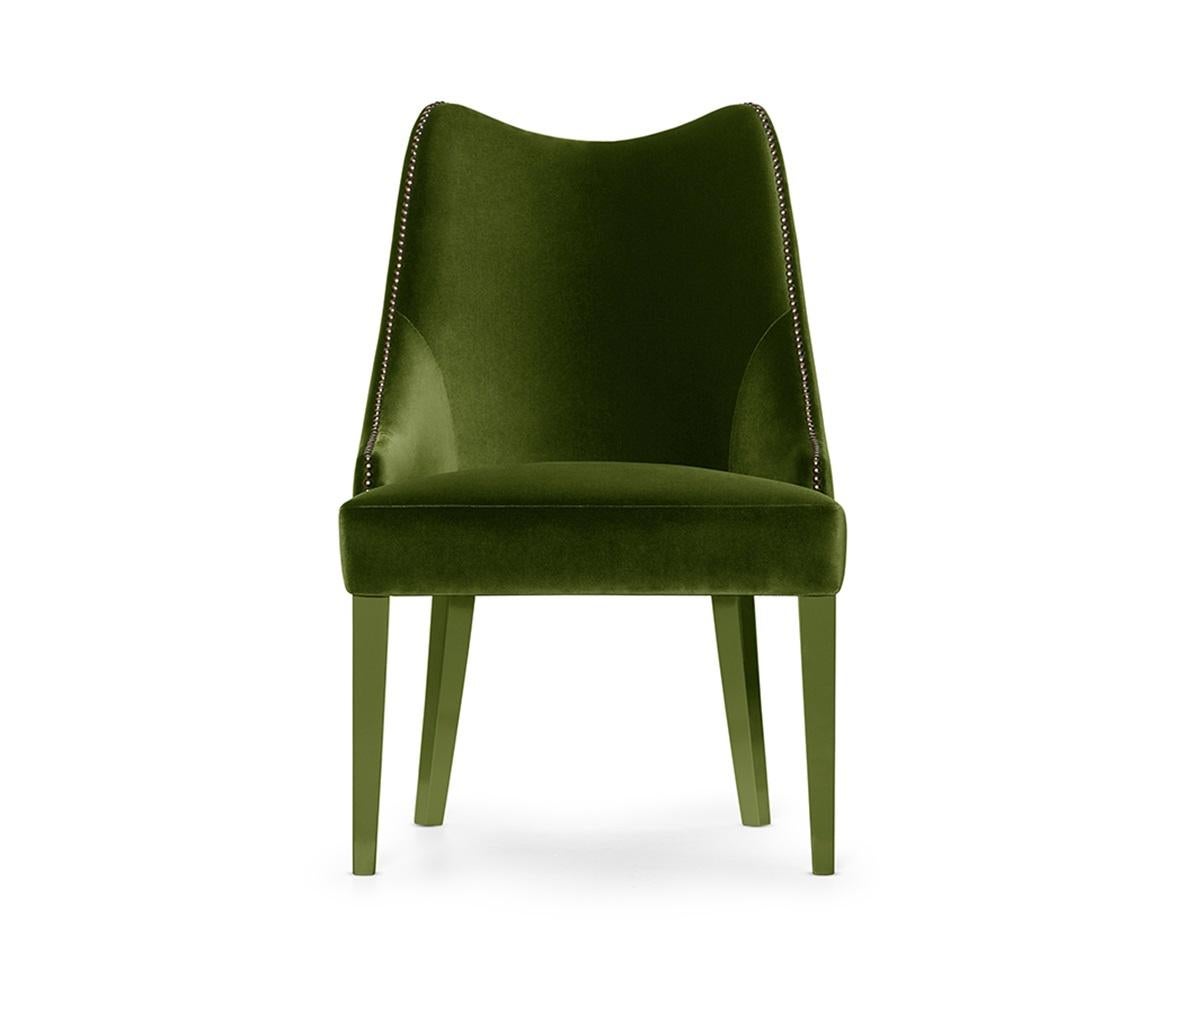 This Chair is the epitome of serenity inducing design. With an embracing silhouette and luxurious deep seat, its sensuous curves and comfortable back perfectly adapt to the body. The nails adorning the curves and back of the pieces provide a